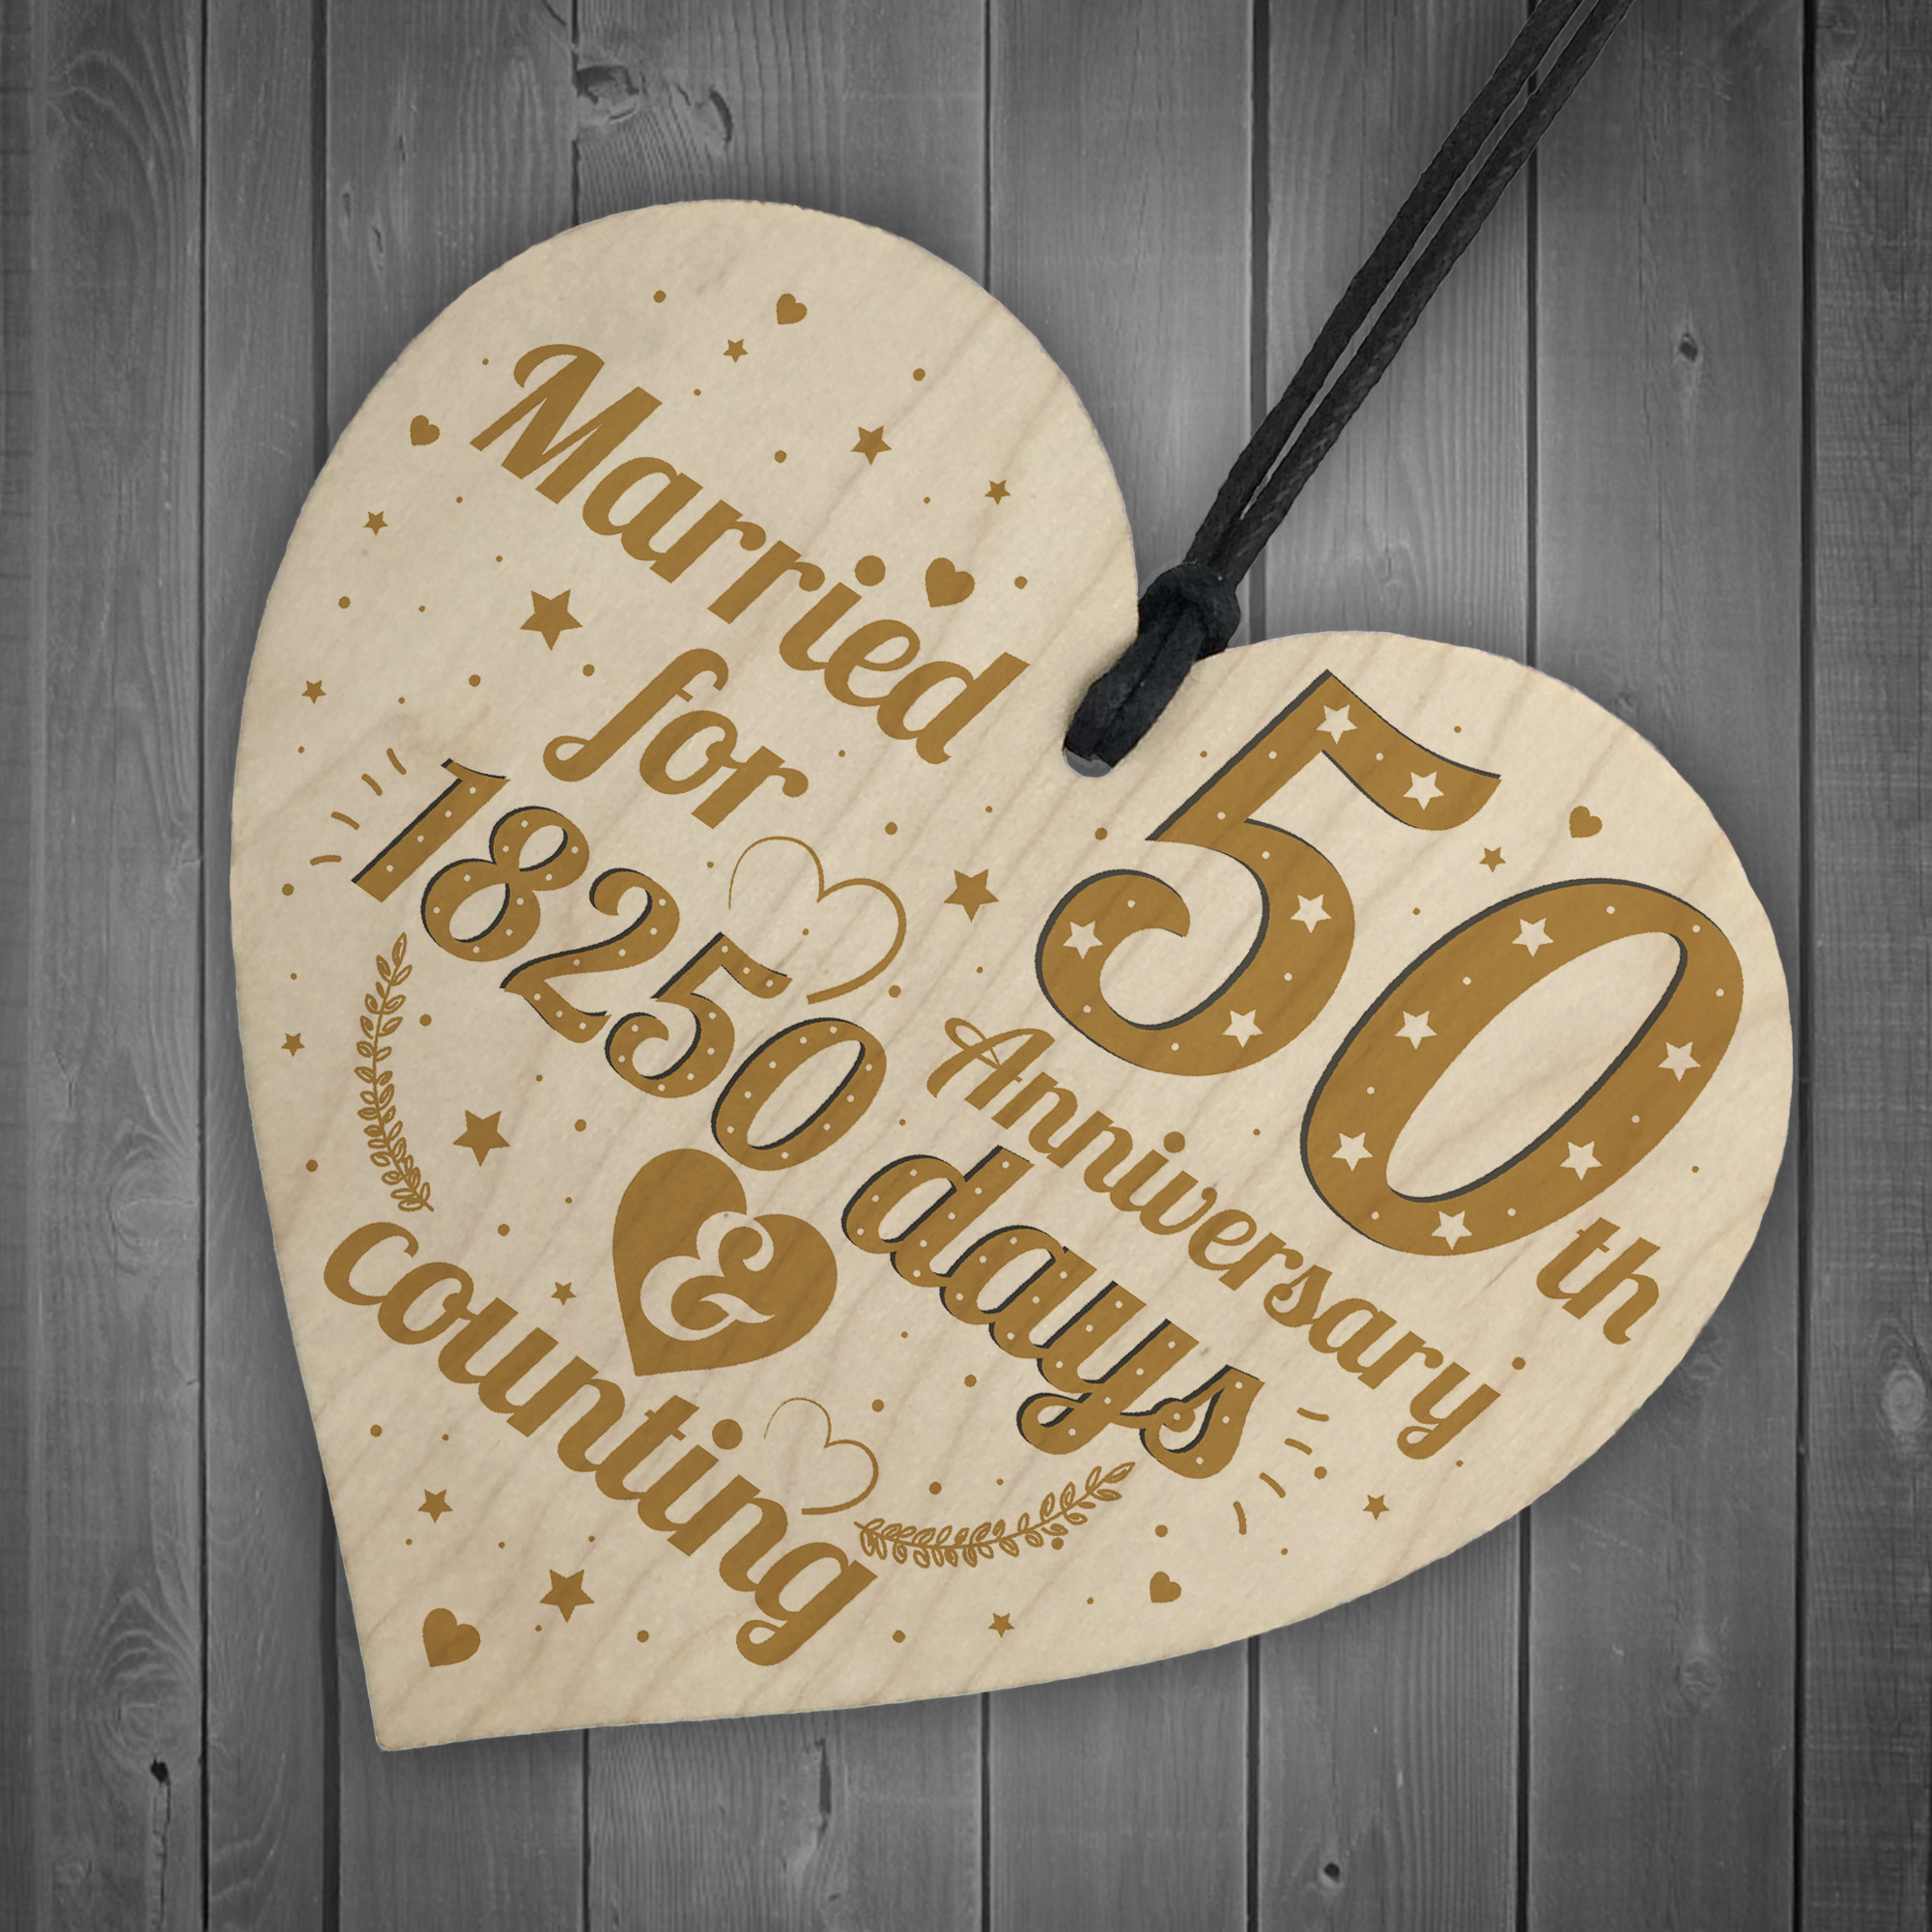 Wood Anniversary Gifts
 50th Wedding Anniversary Wood Heart Gift Gold Fifty Years